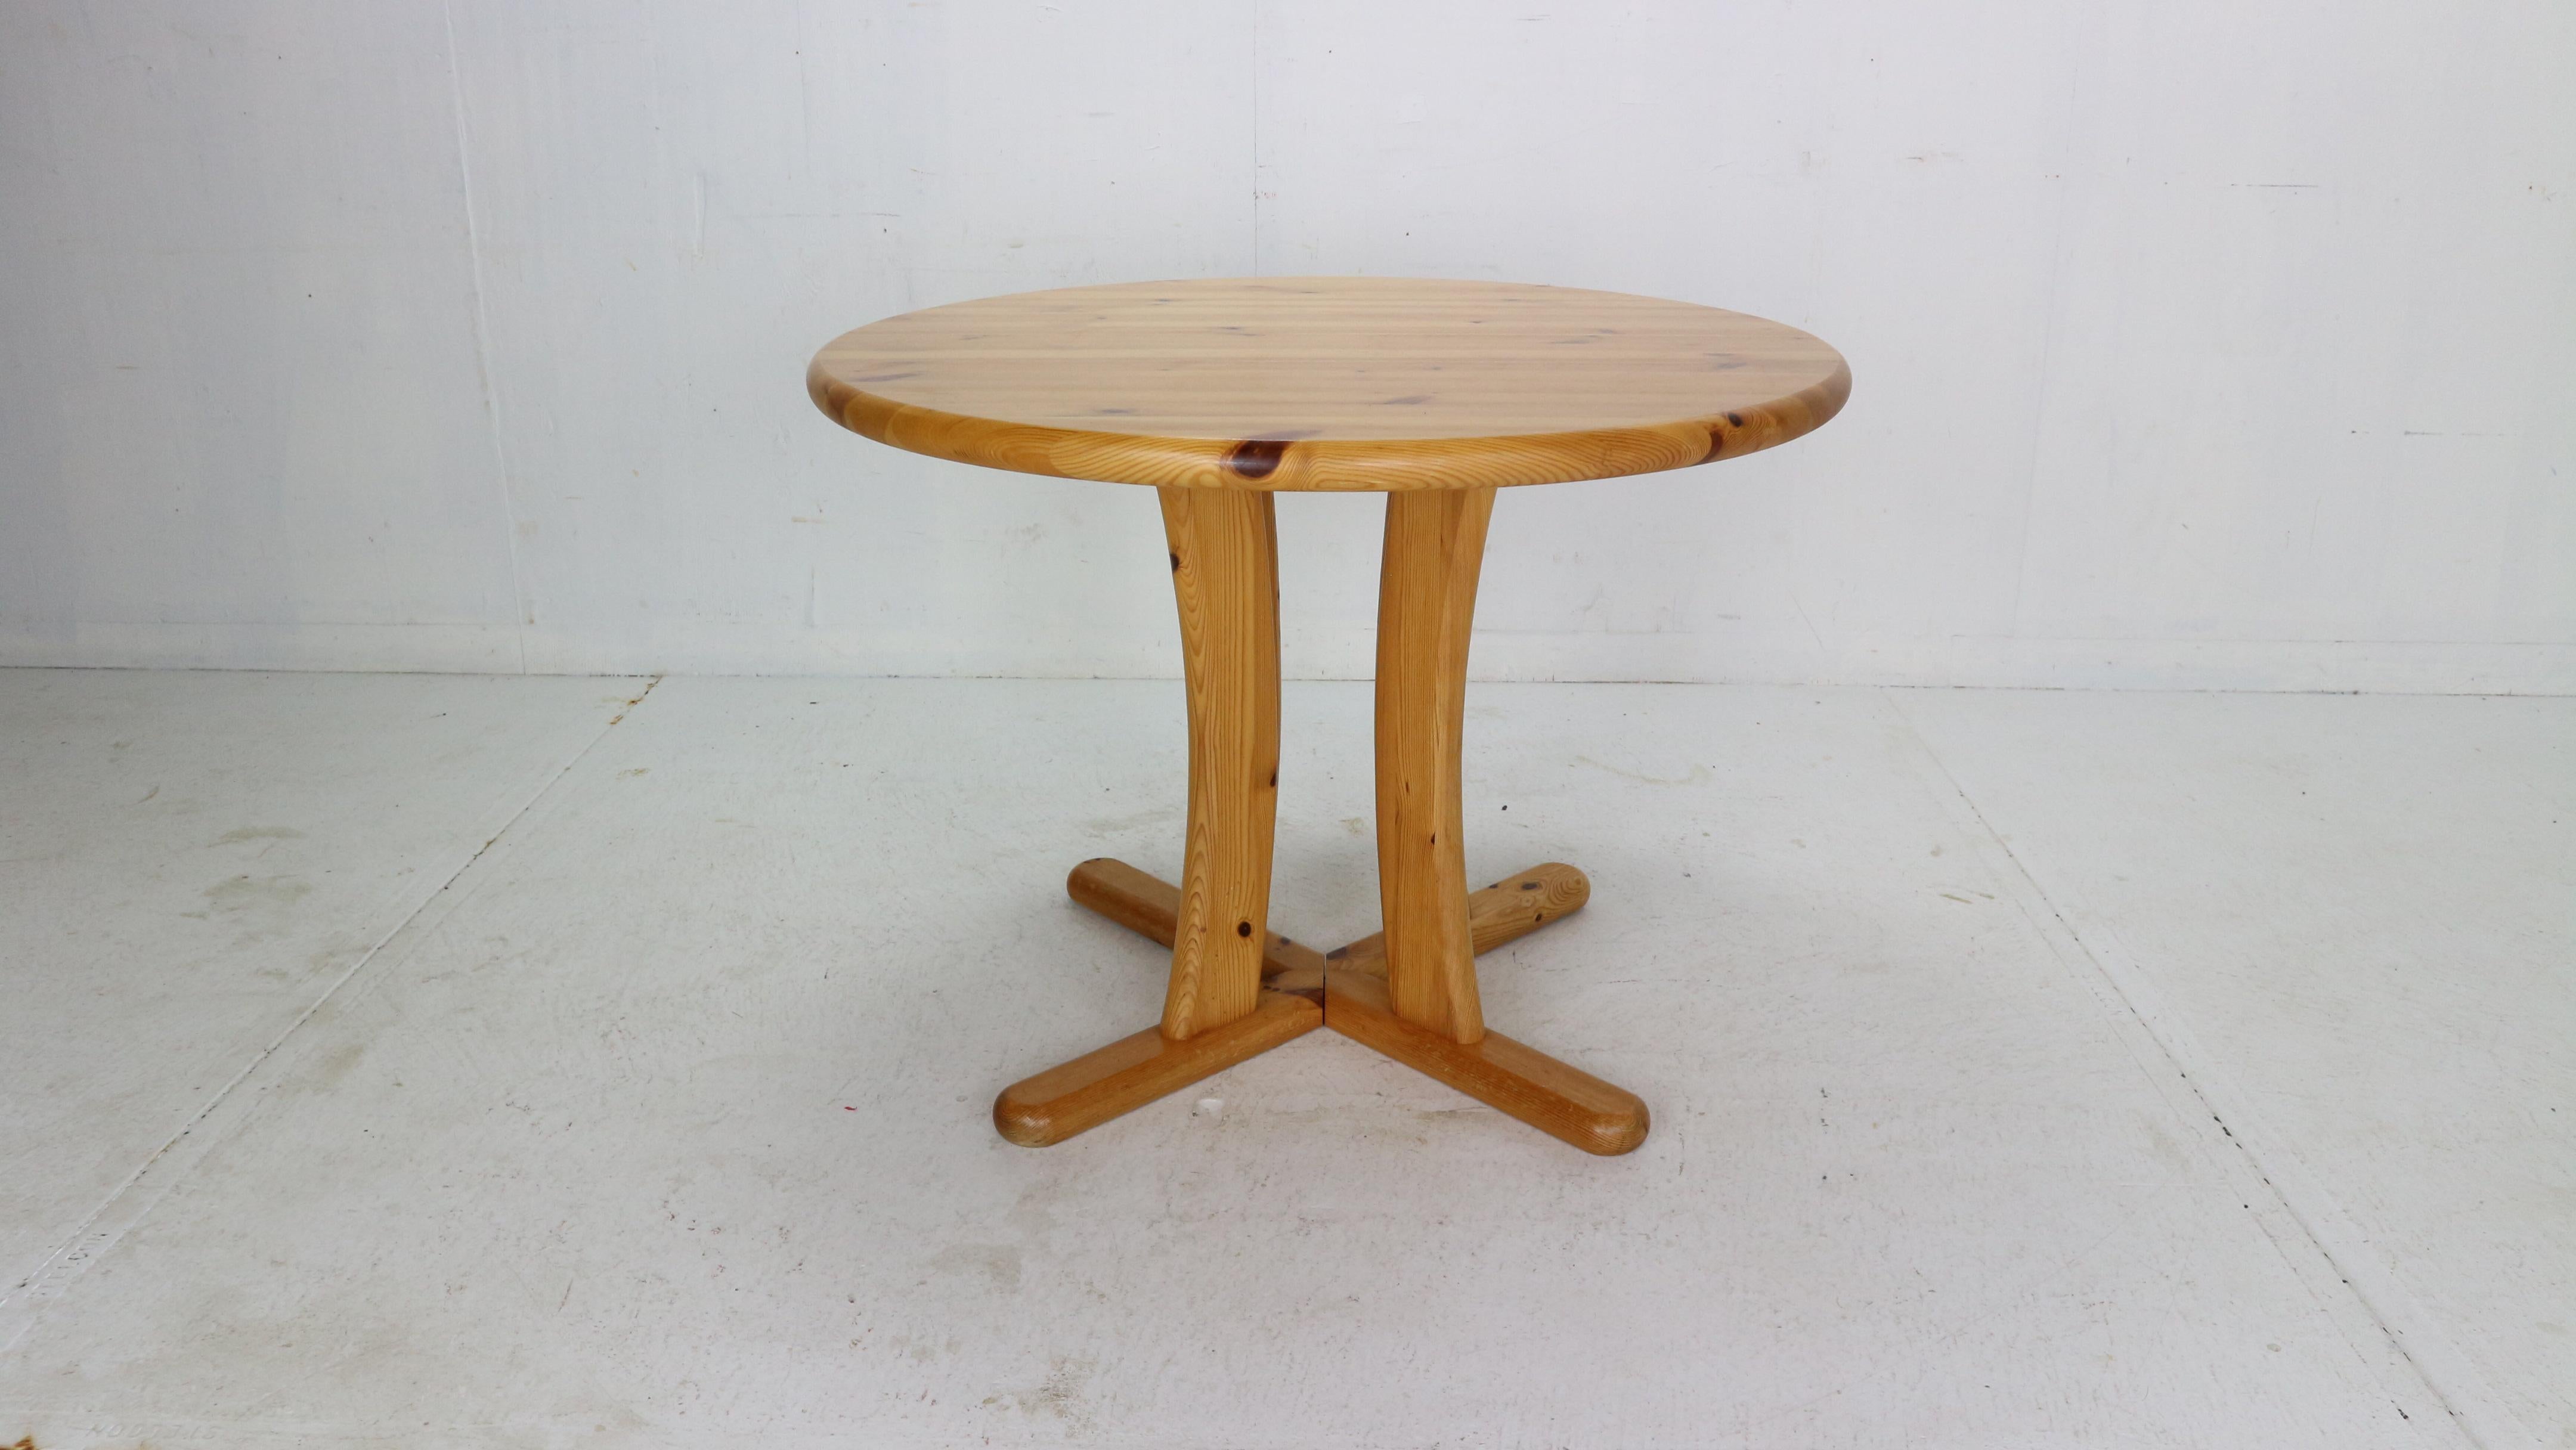 Scandinavian Modern period round shape dinning table in the style of Rainer Daumiller in 1970's period Denmark.
Table is made of solid pinewood, representing beautiful wooden patina.
Curved thick legs makes table overall stable and solid.
The